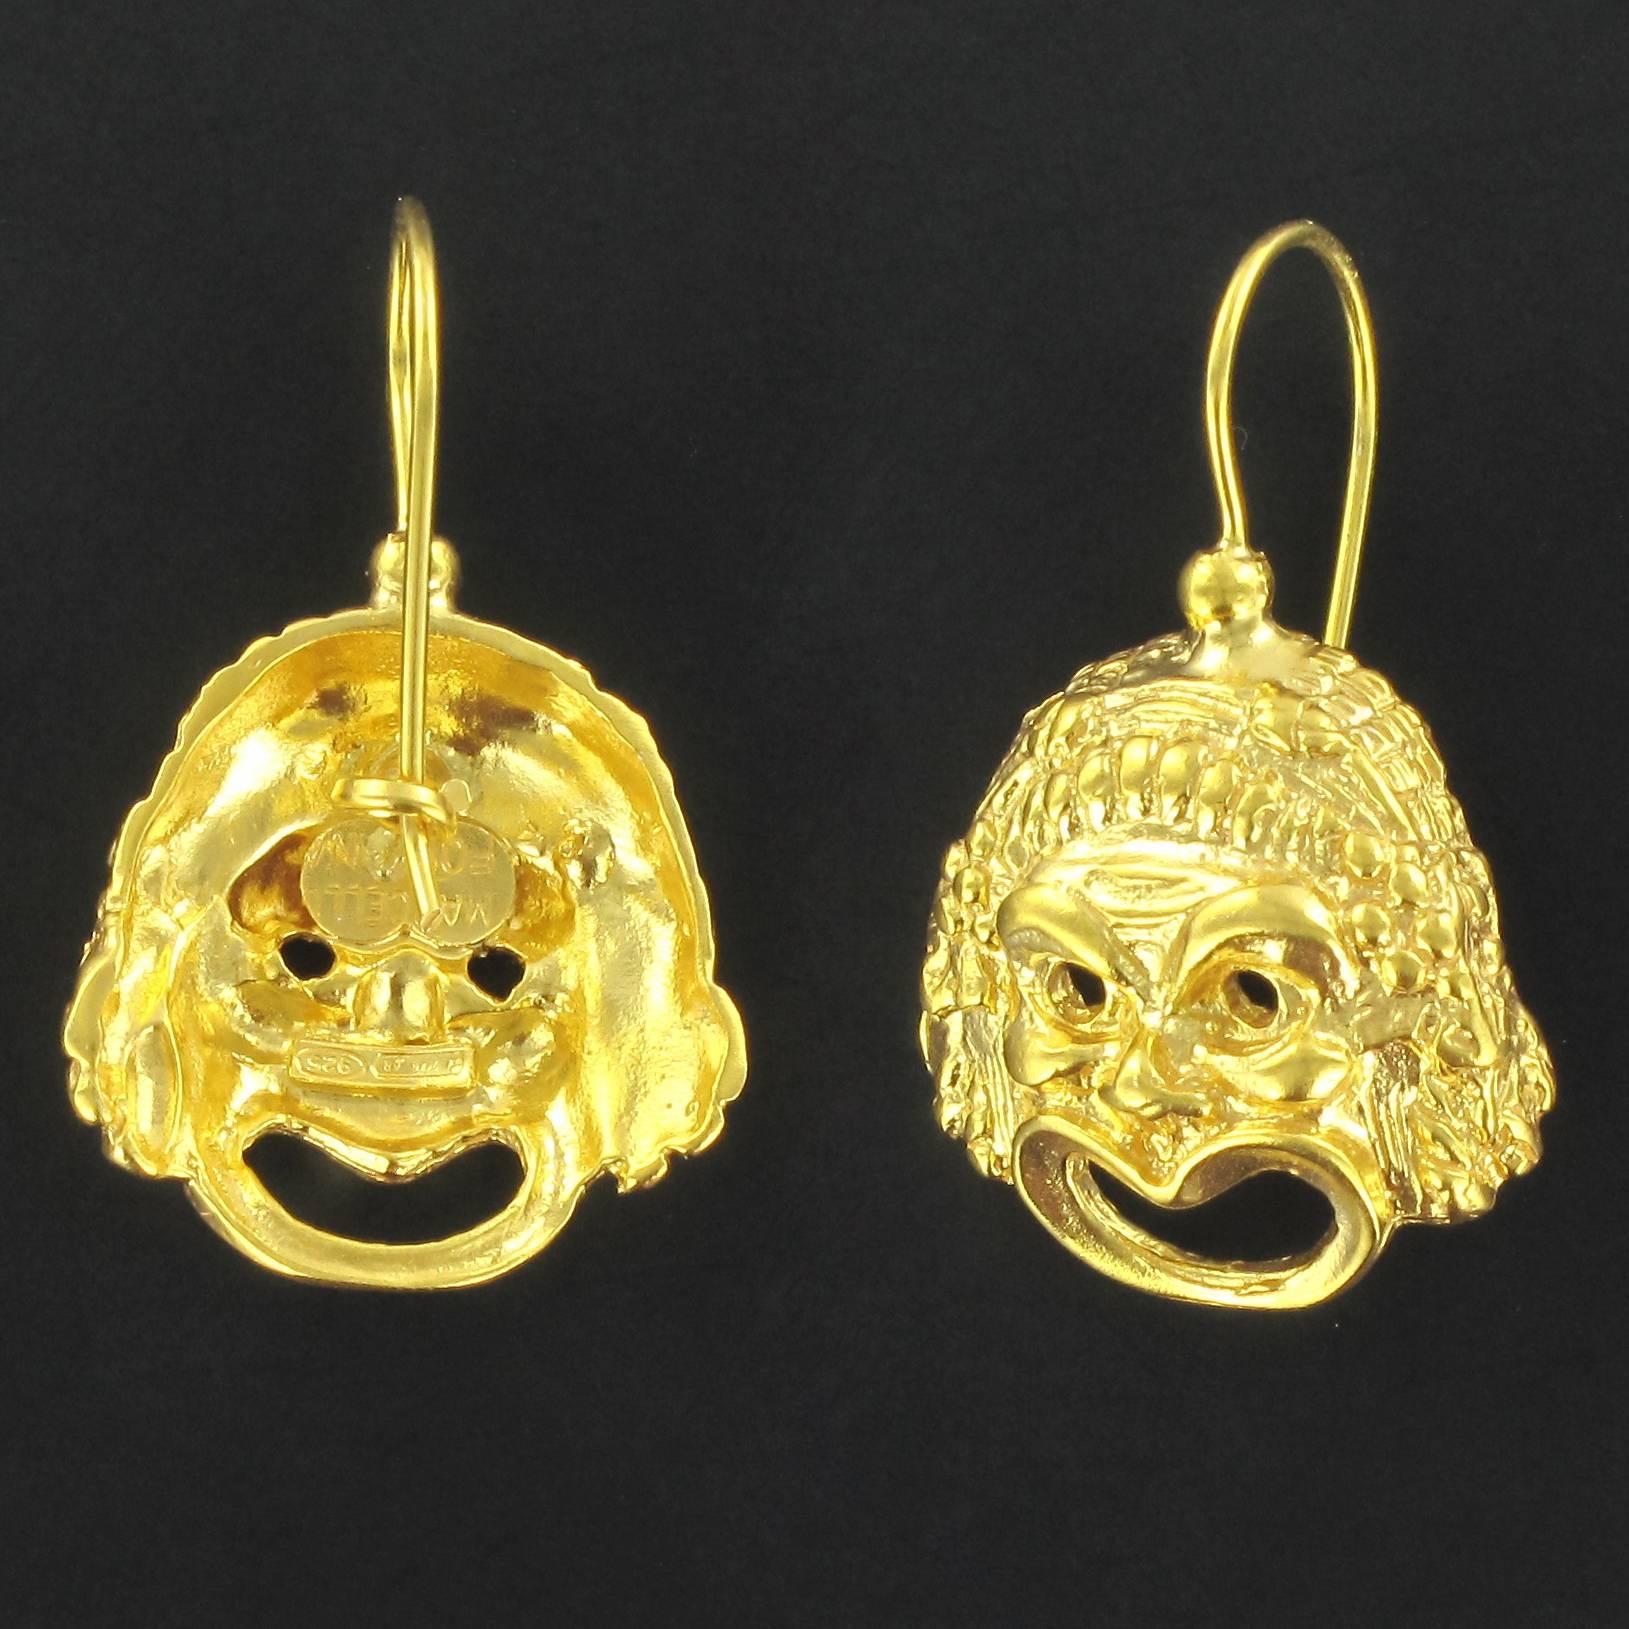 For pierced ears.

Pair of earrings in vermeil, silver and yellow gold.

Earring earring, each is formed of a decoration representing a grimacing mask. The clasps are goosenecks with safety hooks. 

Overall length: 3,5 cm, width to the widest: 2,1